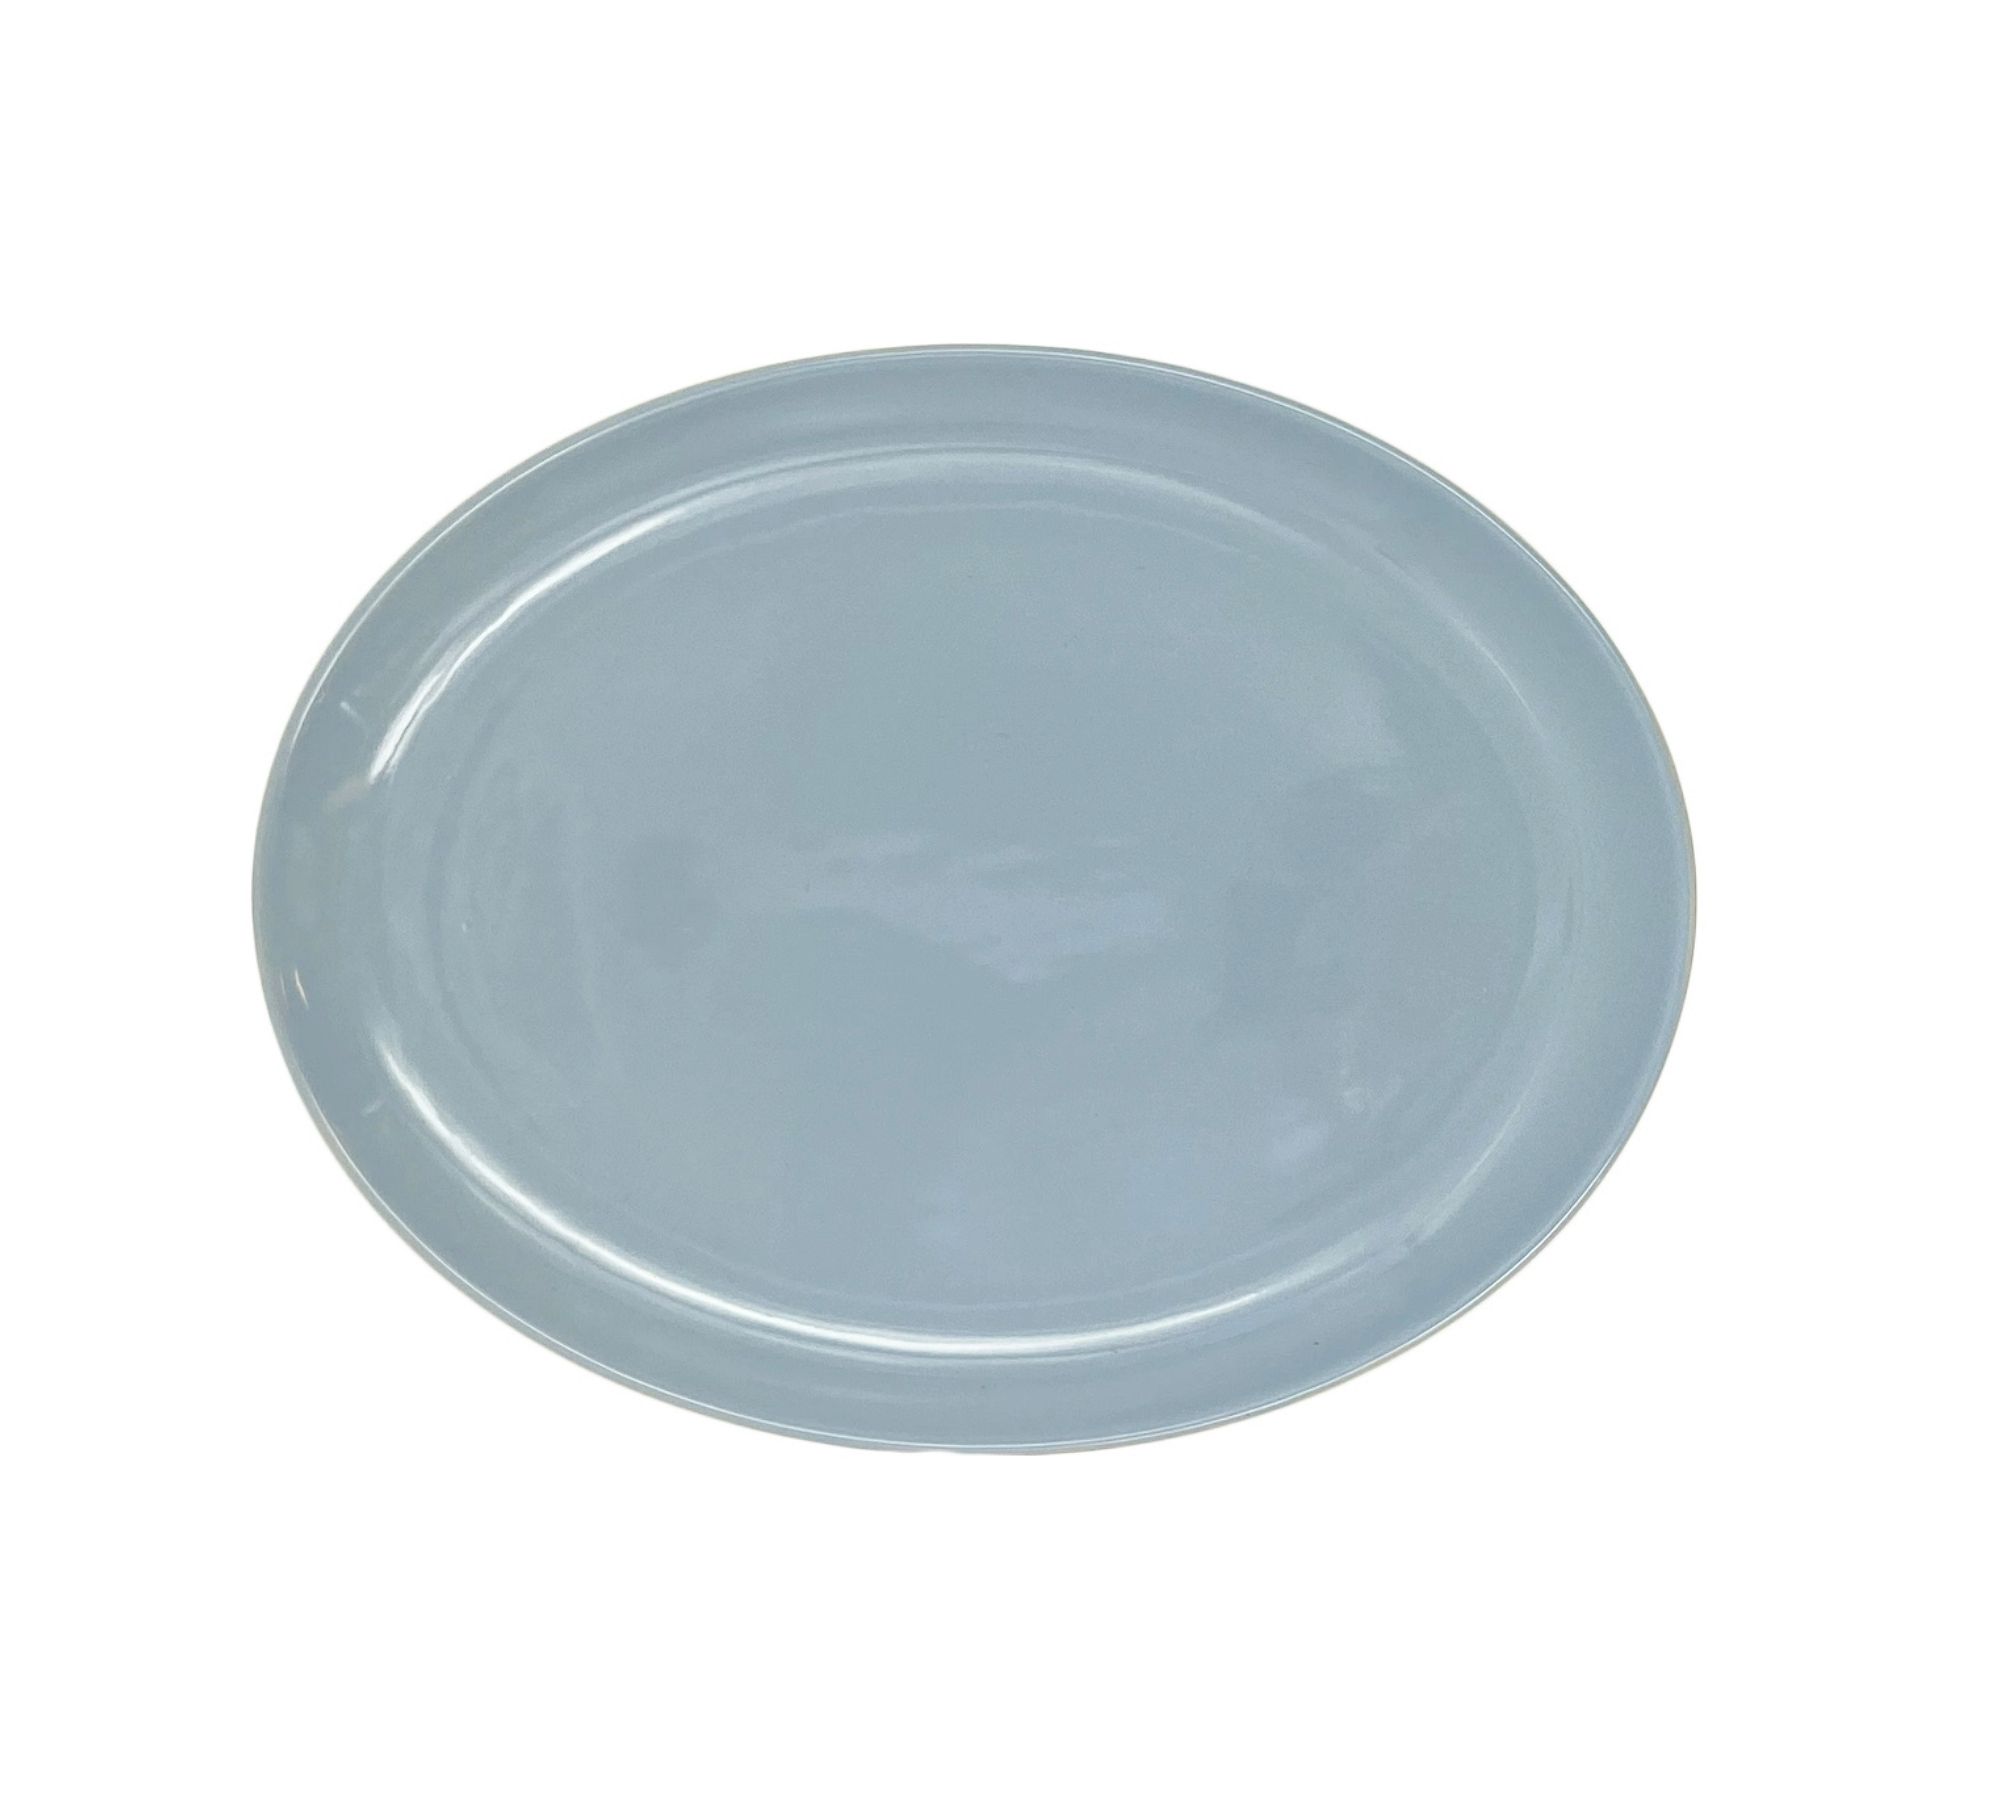 Shell Bisque Oval Platter